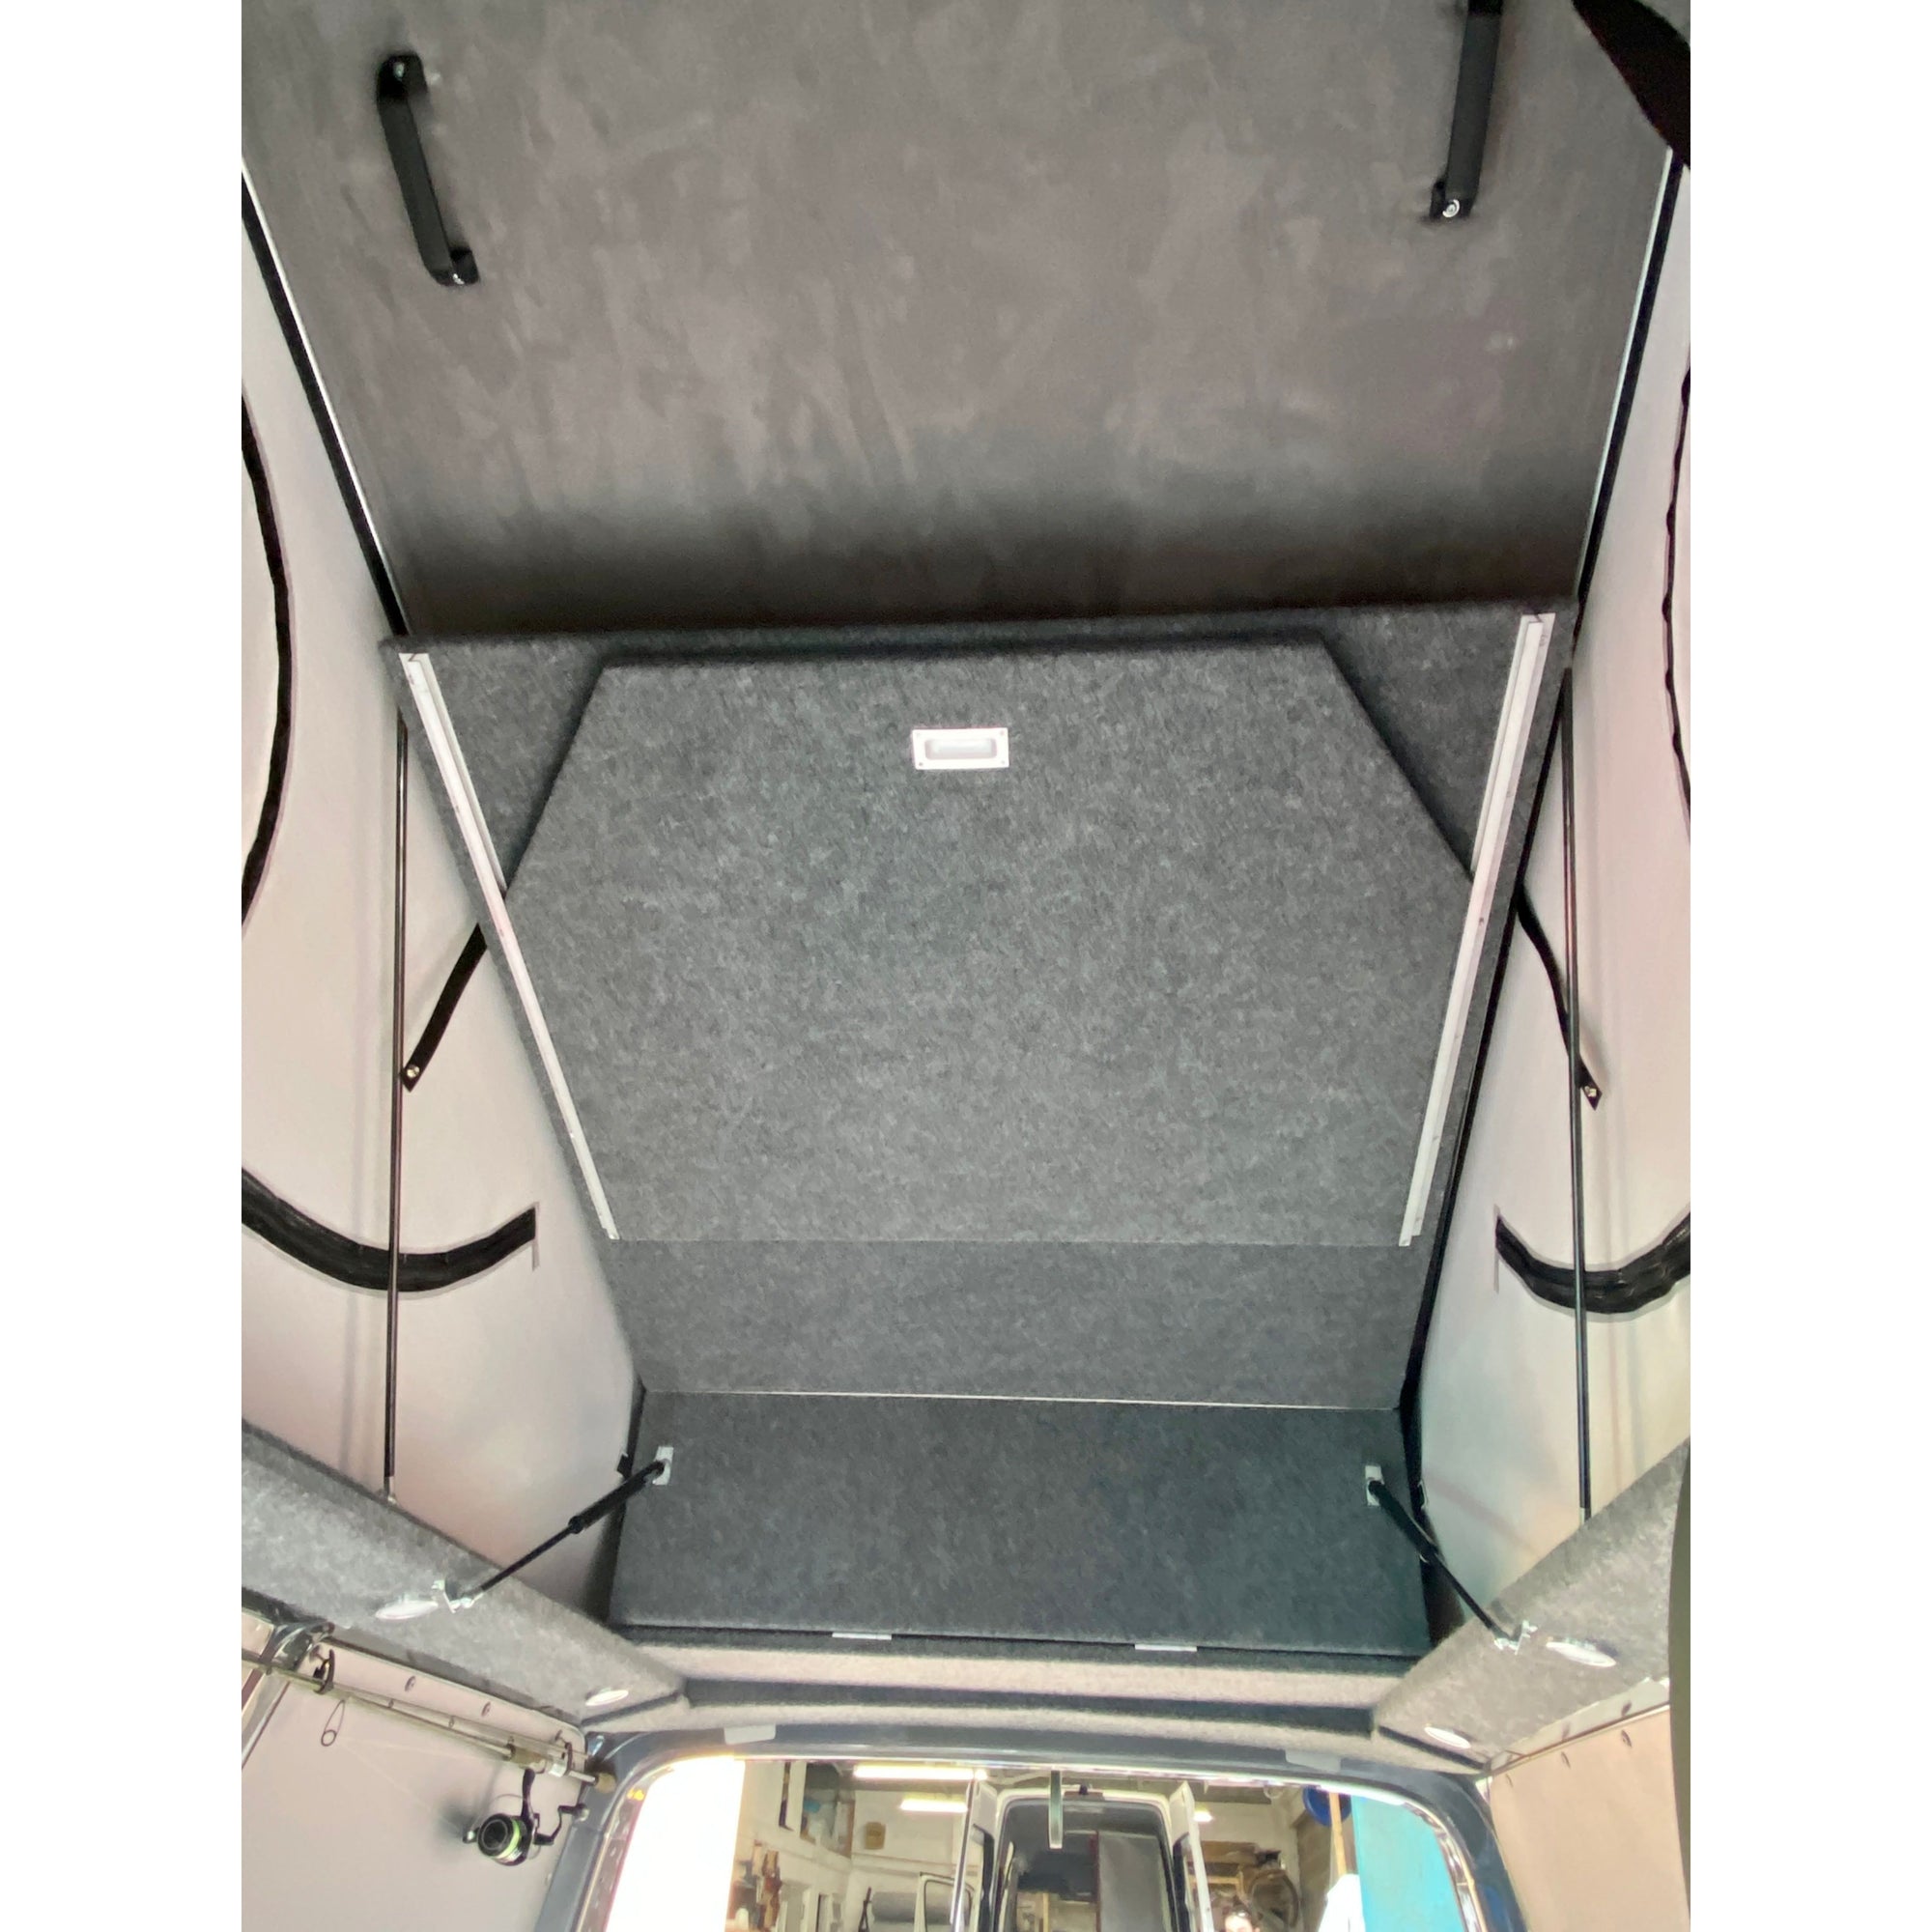 Sound deadening, insulation, ply lining and carpet lining - SWB, VW Transporter or similar VanGo Campers